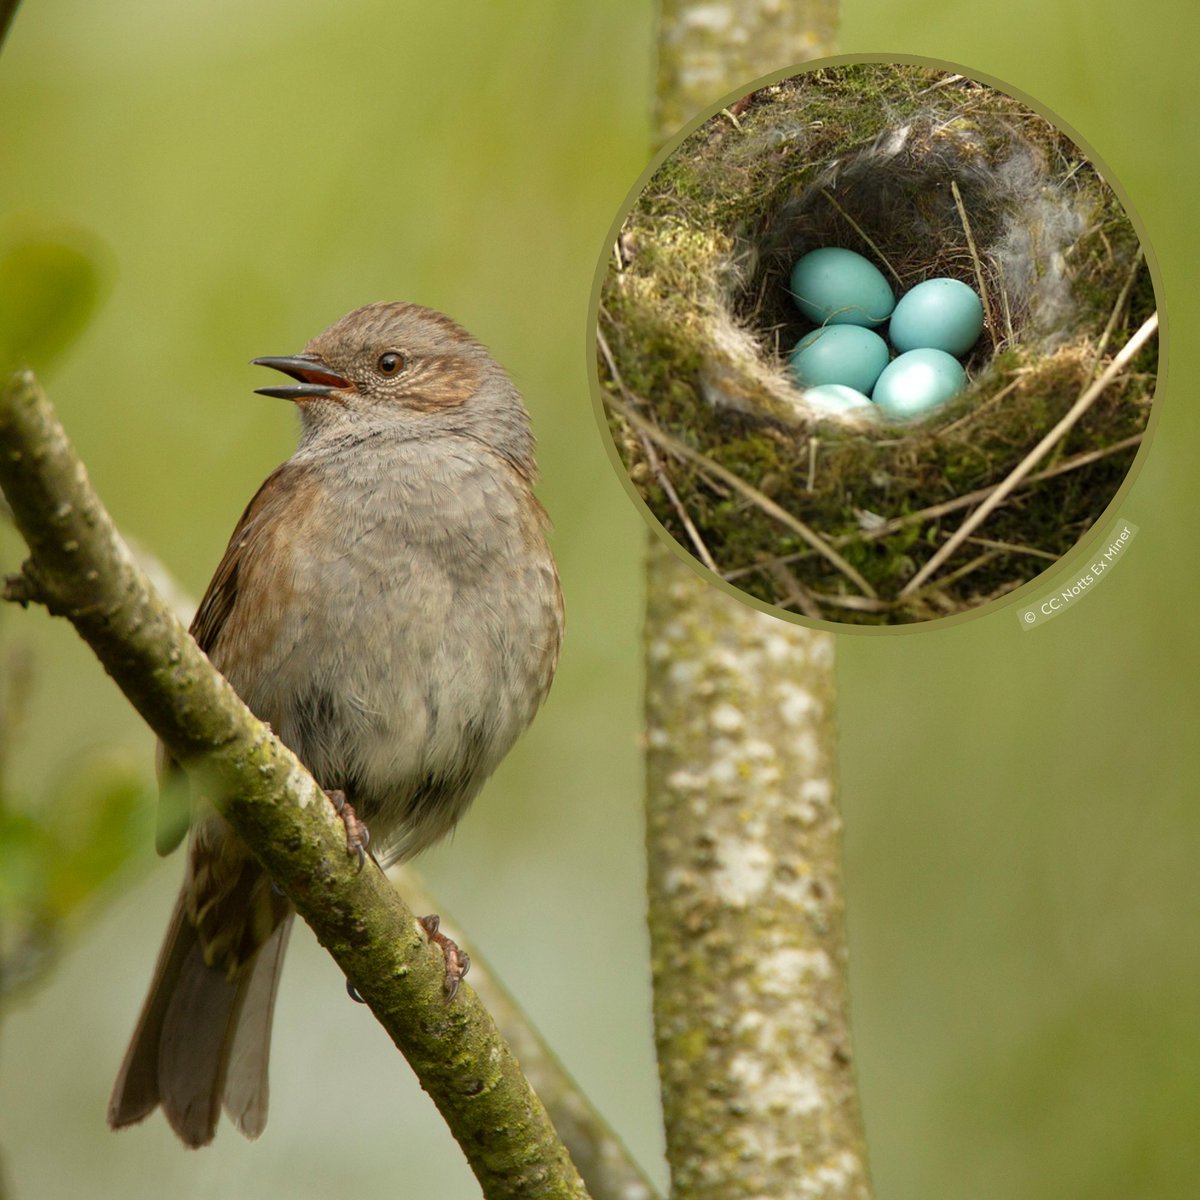 A nod to #NationalHedgerowWeek, the secretive Dunnock stars in today’s #NestKnowledge! 🌳 Dunnock nests are a stout cup, nestled low in thick bushes and hedgerows. Woven from twigs, they're then lined with soft moss and hair. Egg ID: 4-5, bright blue, spotless and vibrant.